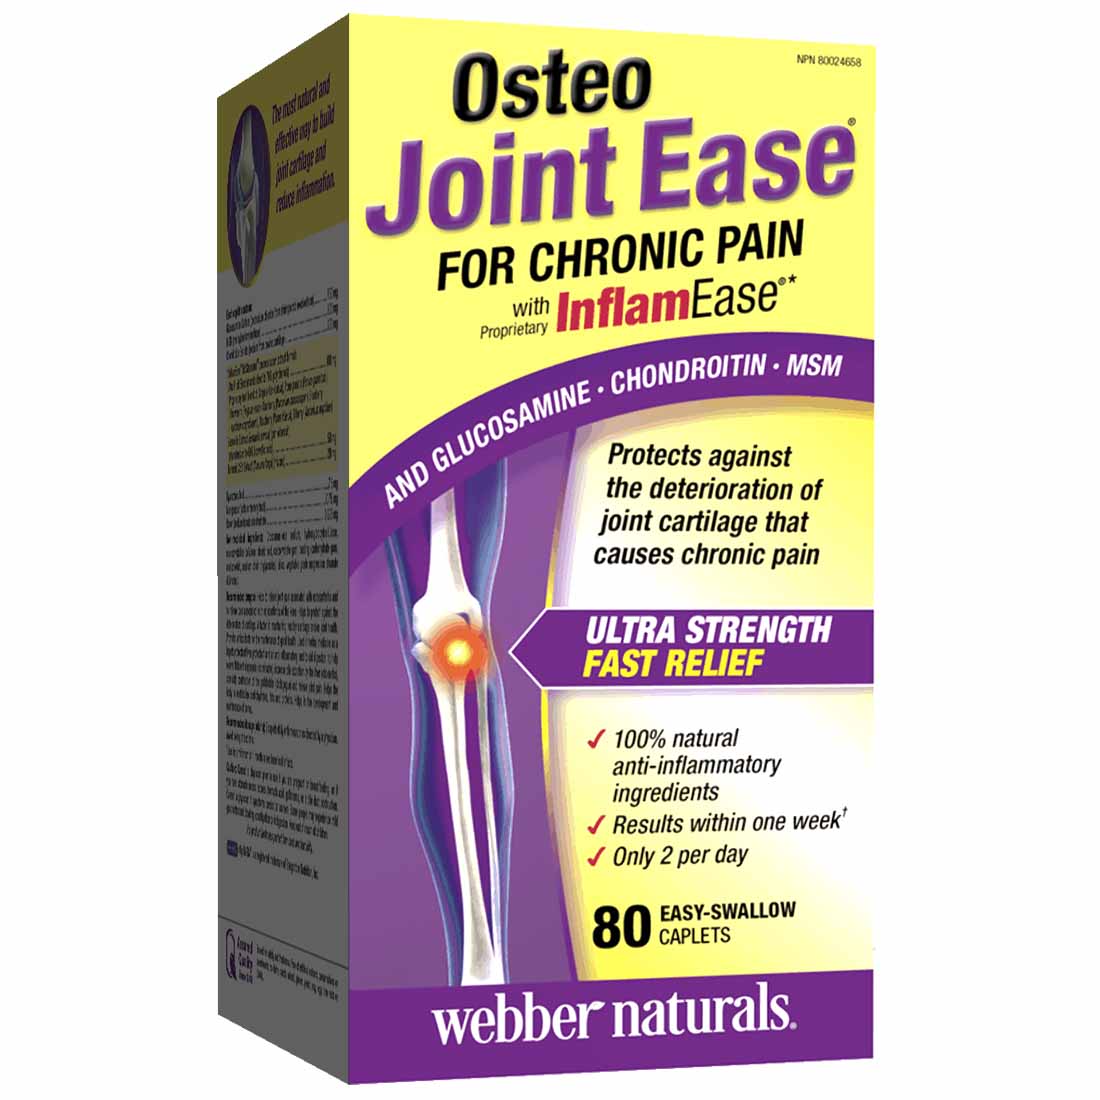 Webber Naturals Osteo Joint Ease with InflamEase and Glucosamine Chondroitin MSM, 80 Easy Swallow Caplets